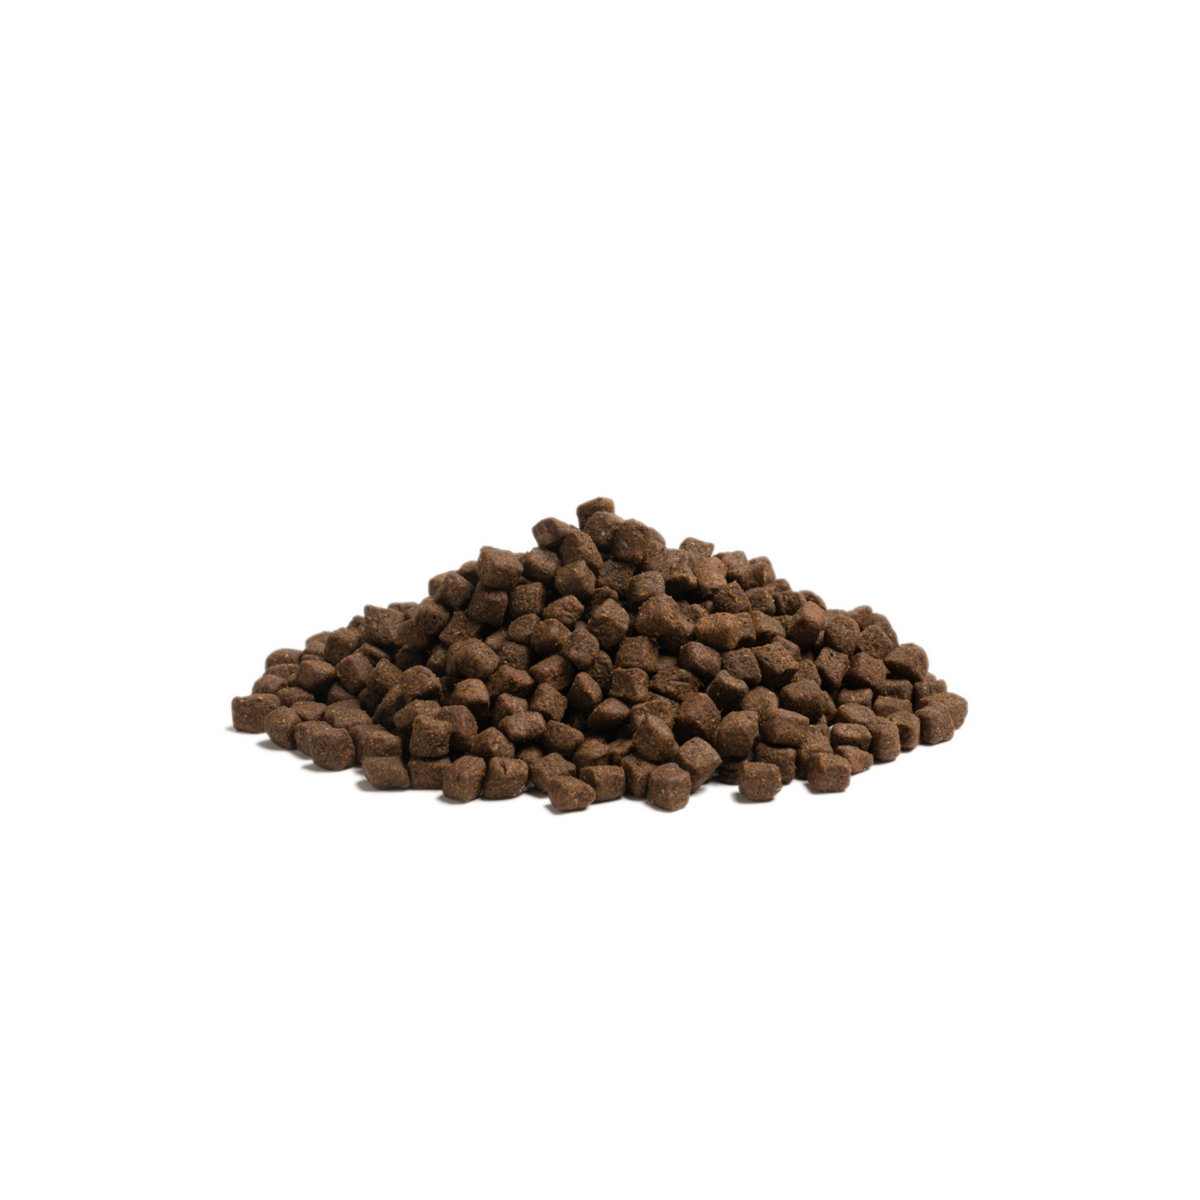 74% meat Yorkshire deer, lamb, chick, eggs Super premium grainless feed for adult dogs of small breeds weighing up to 15kg ESTATE LIVING